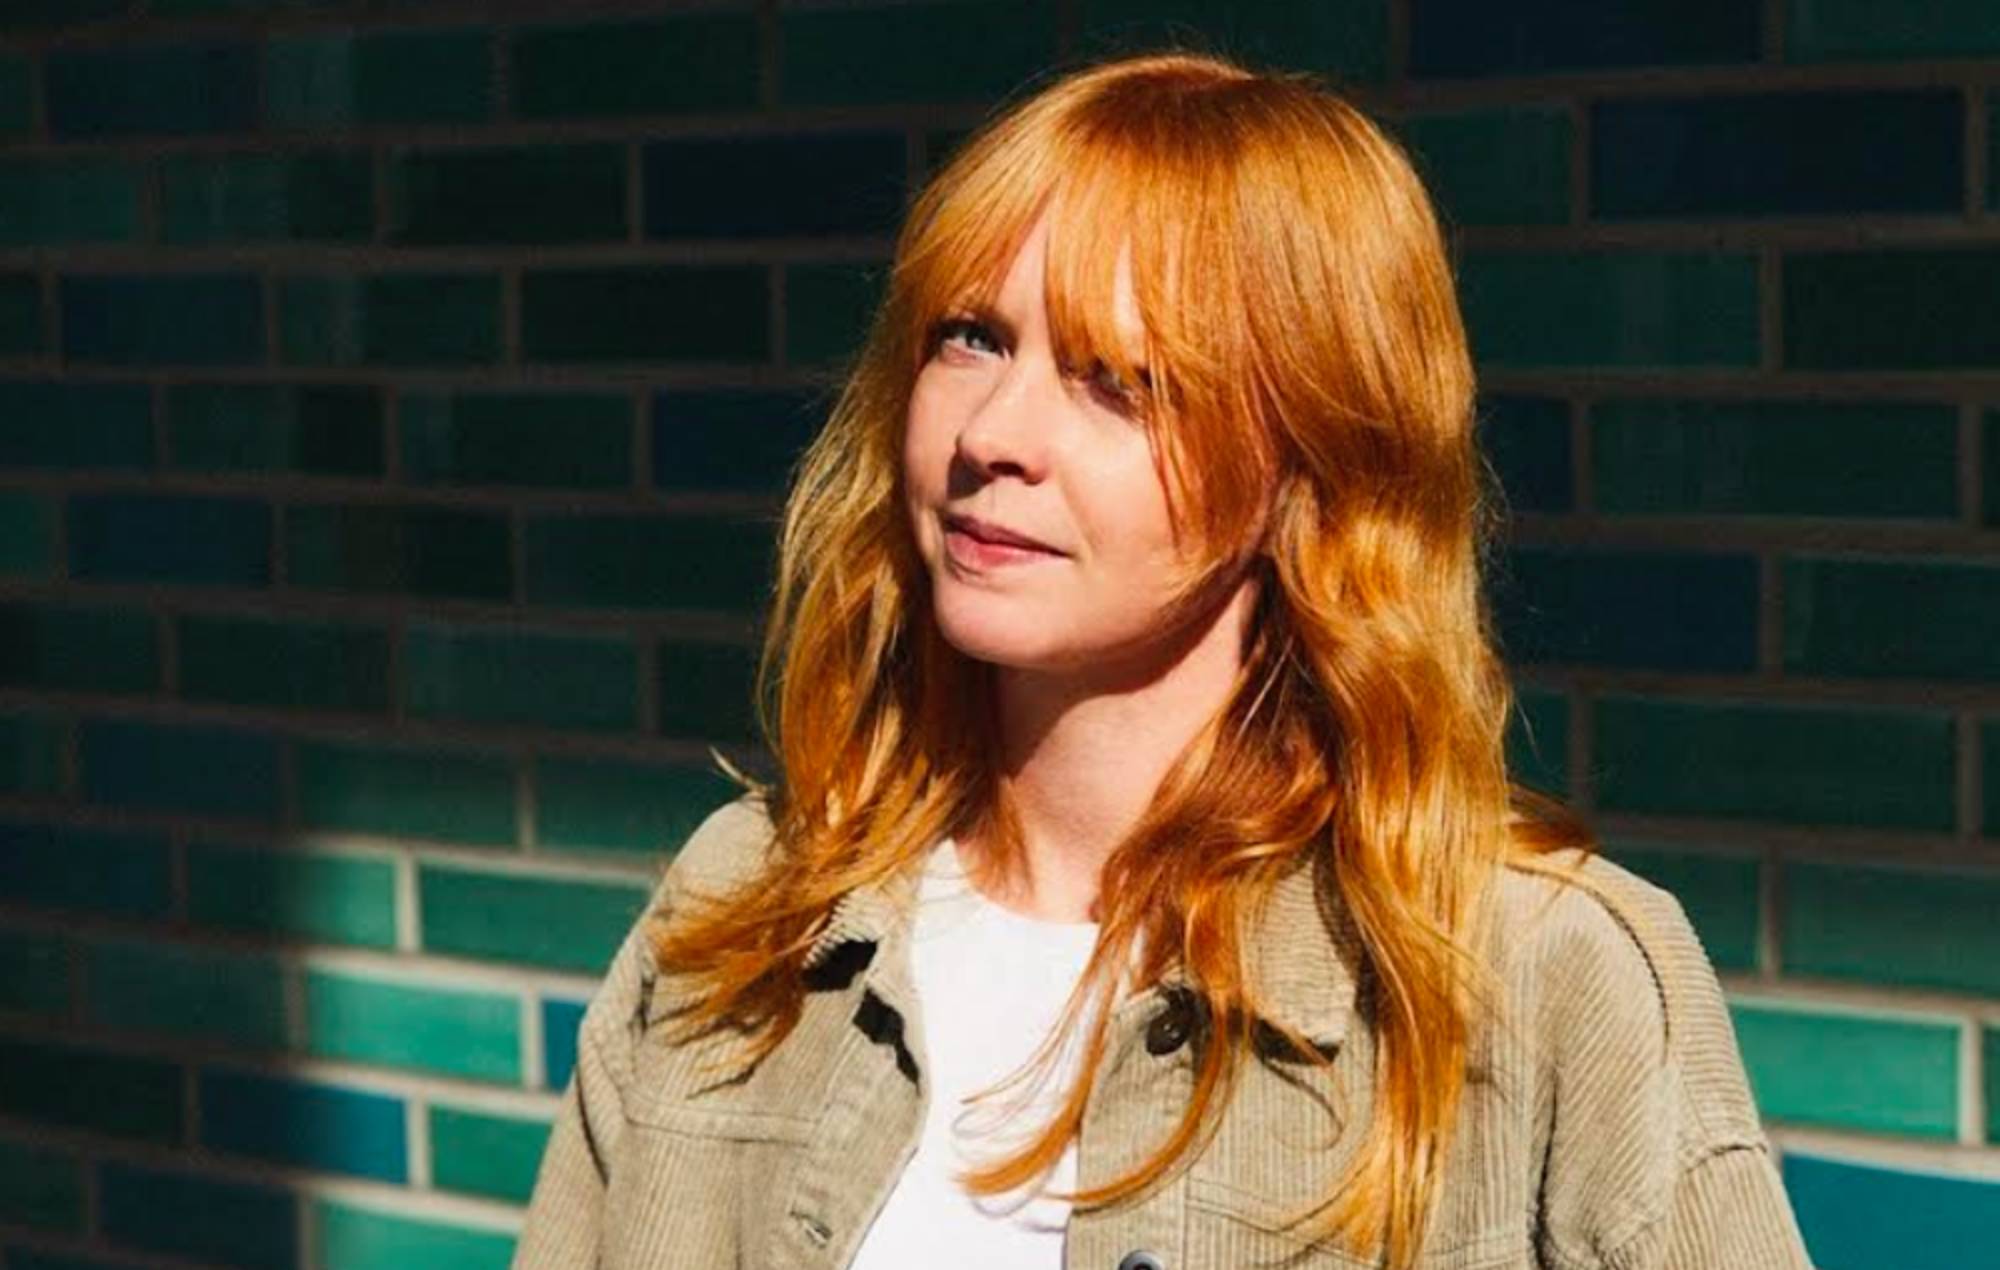 Lucy Rose shares first new single in four years, ‘Could You Help Me’